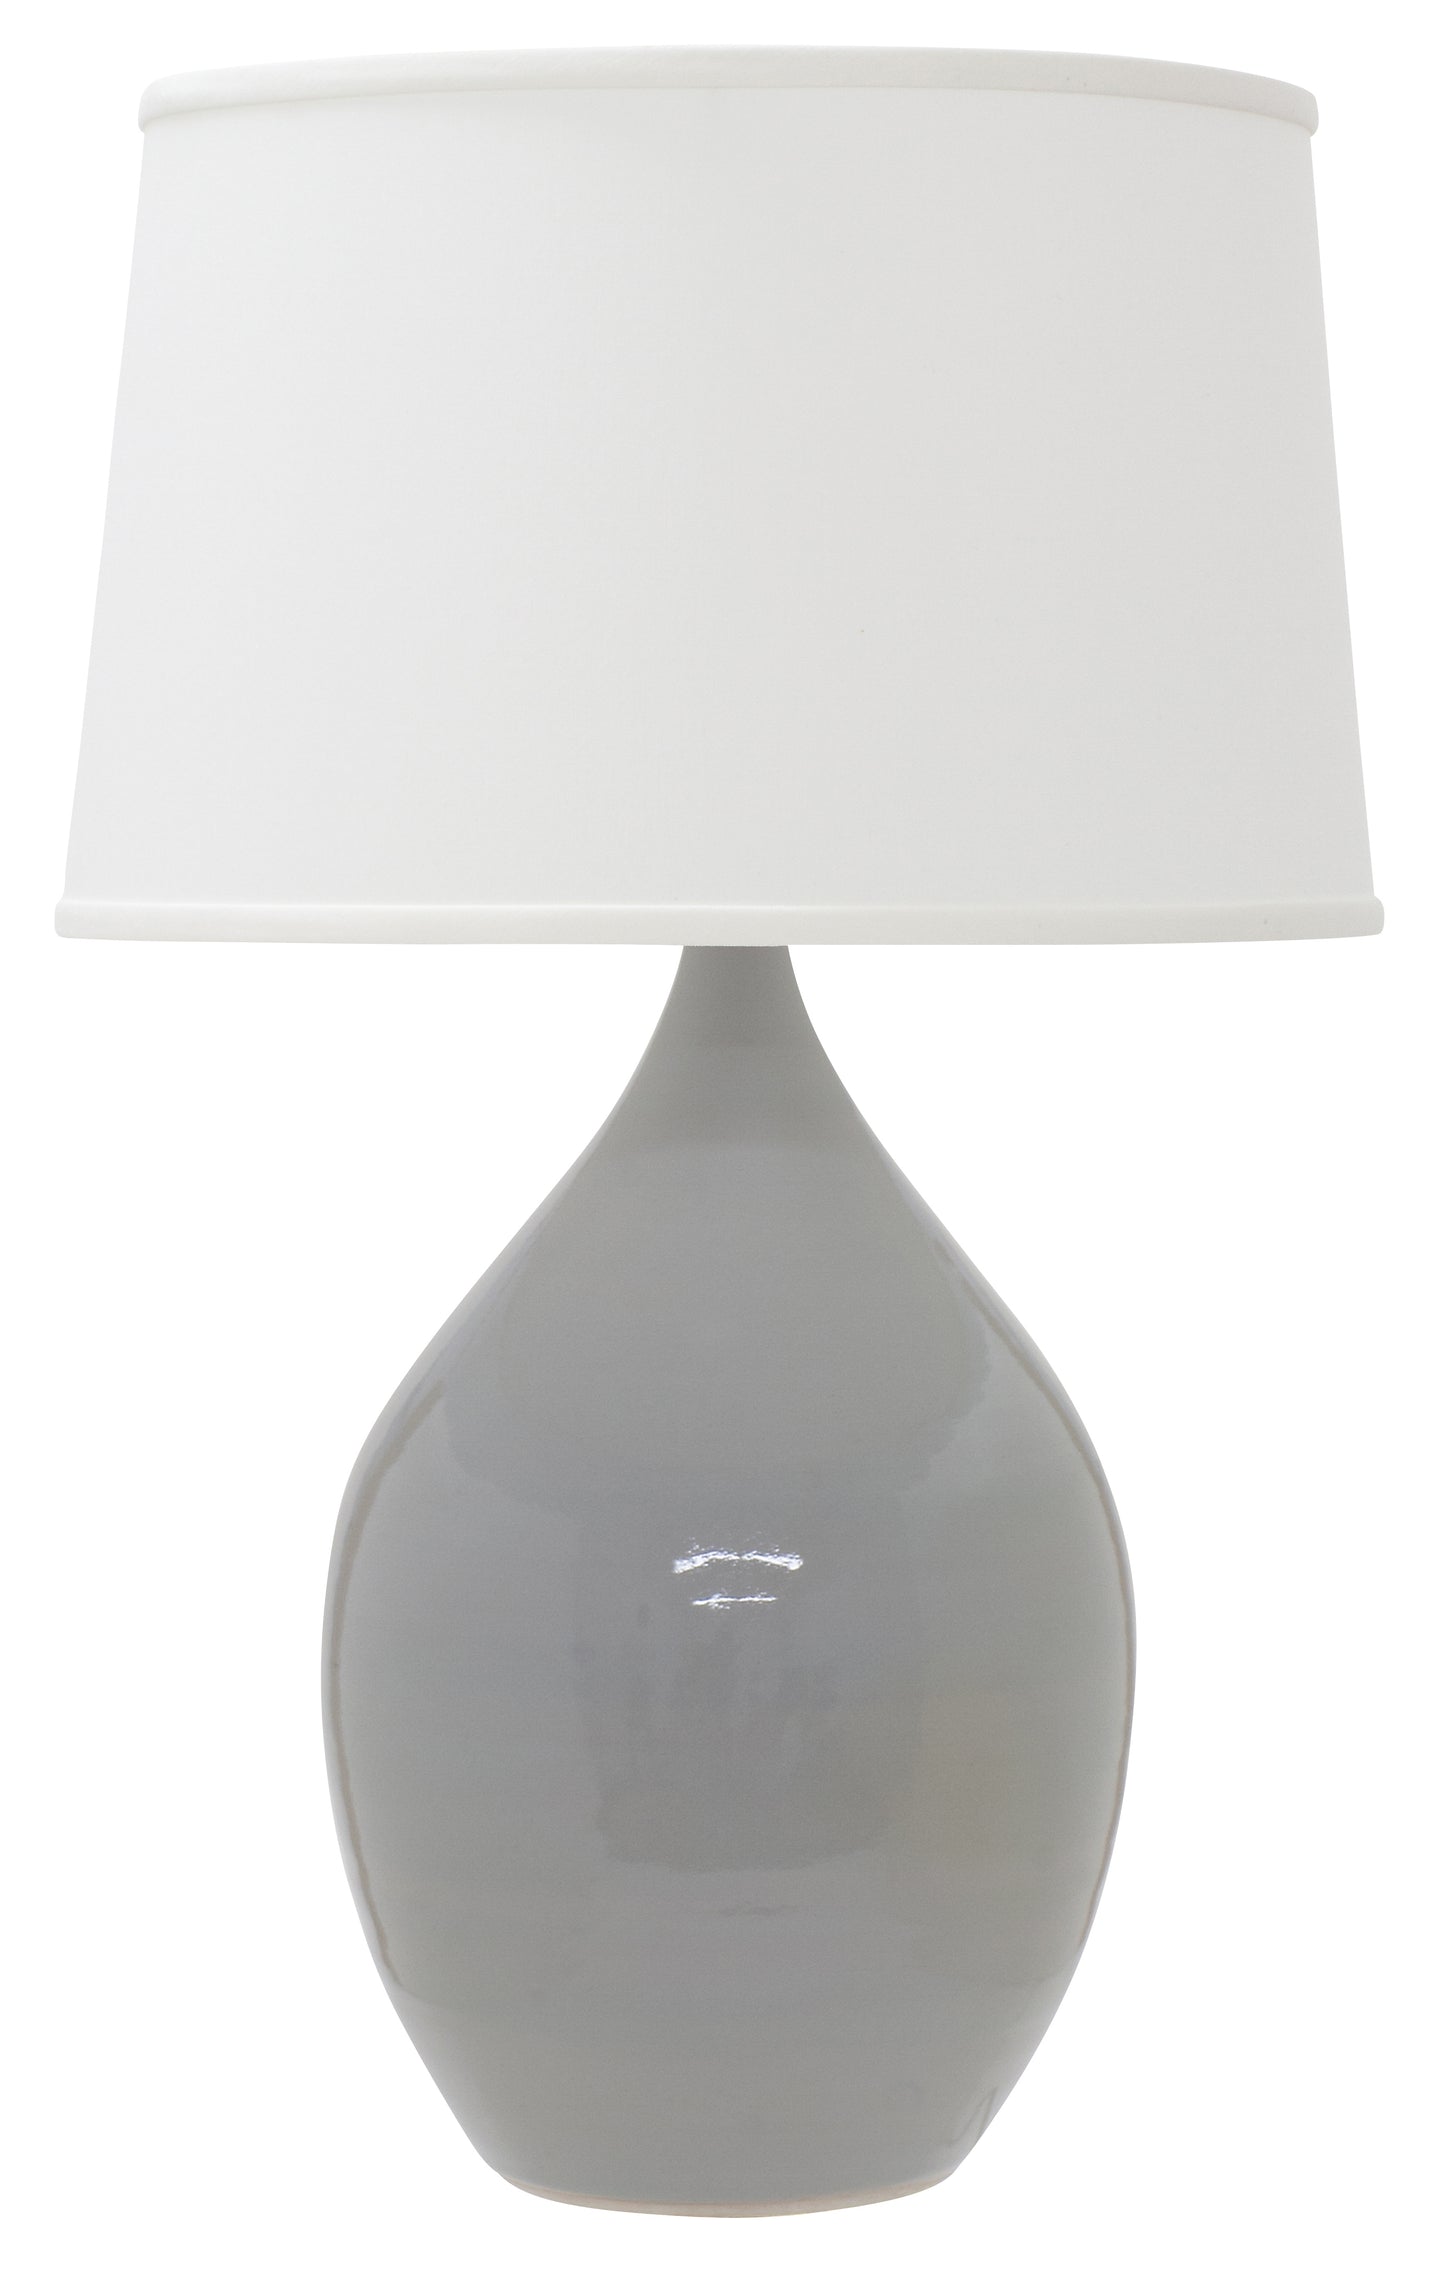 House of Troy Scatchard 18.5" Stoneware Table Lamp in Gray Gloss GS202-GG